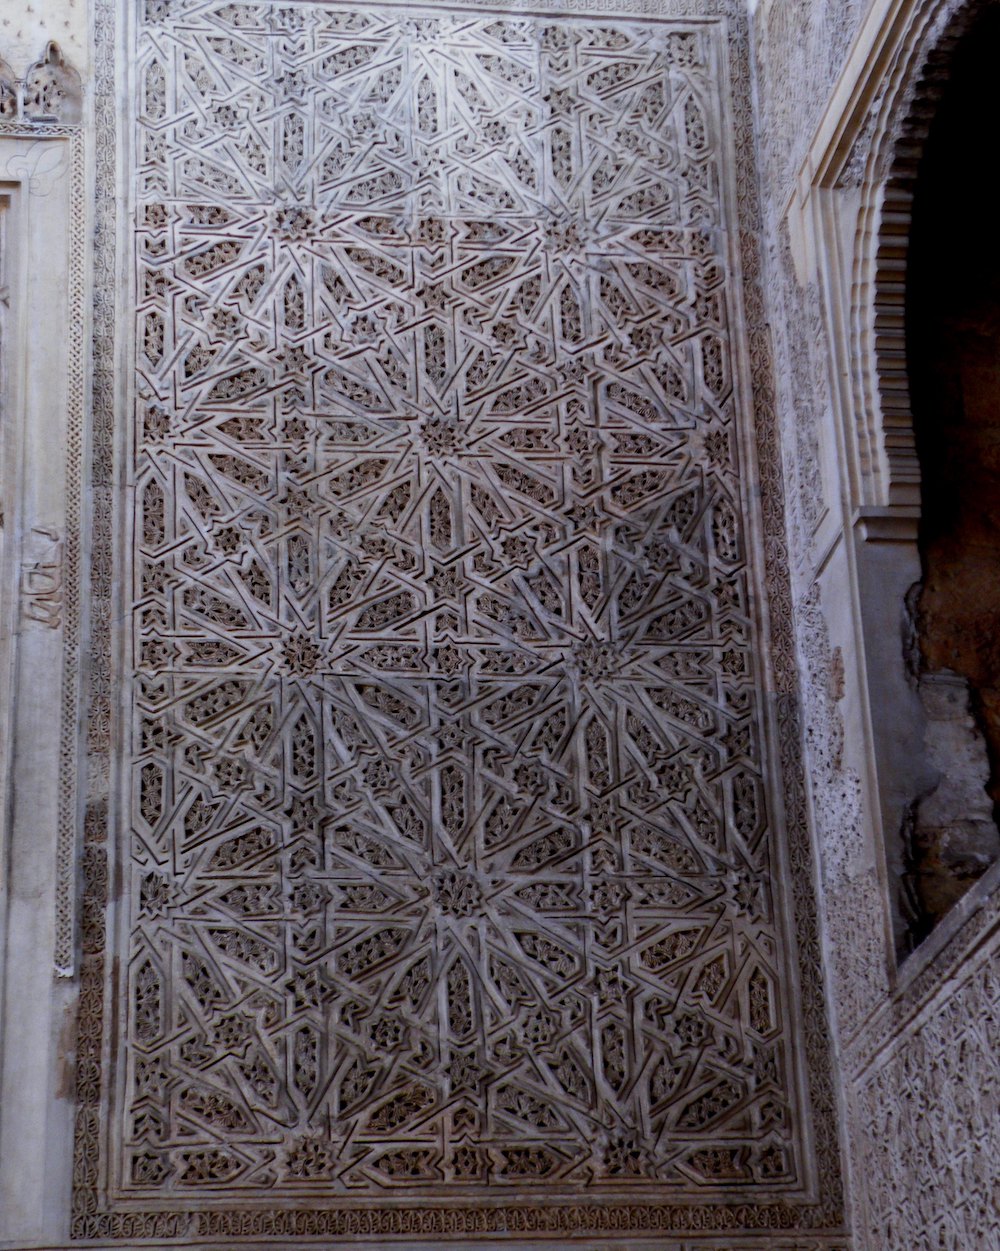 Ten Sephirot on the Cordoba Synagogue's east wall in Spain